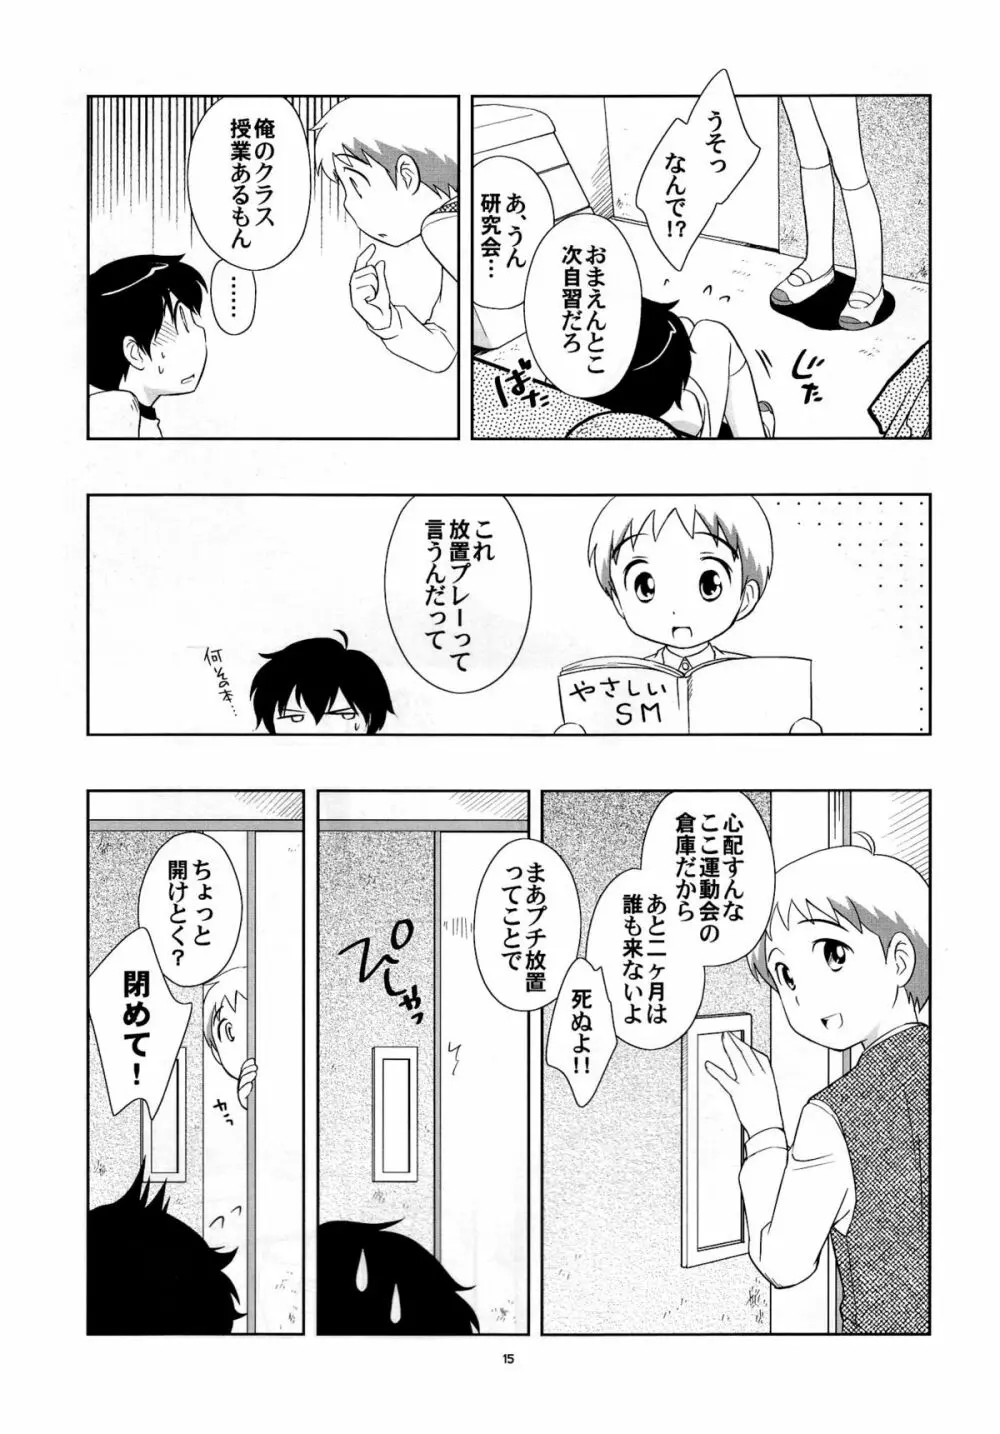 the Slave driver at school Again 2年目もあそぼ! Page.14